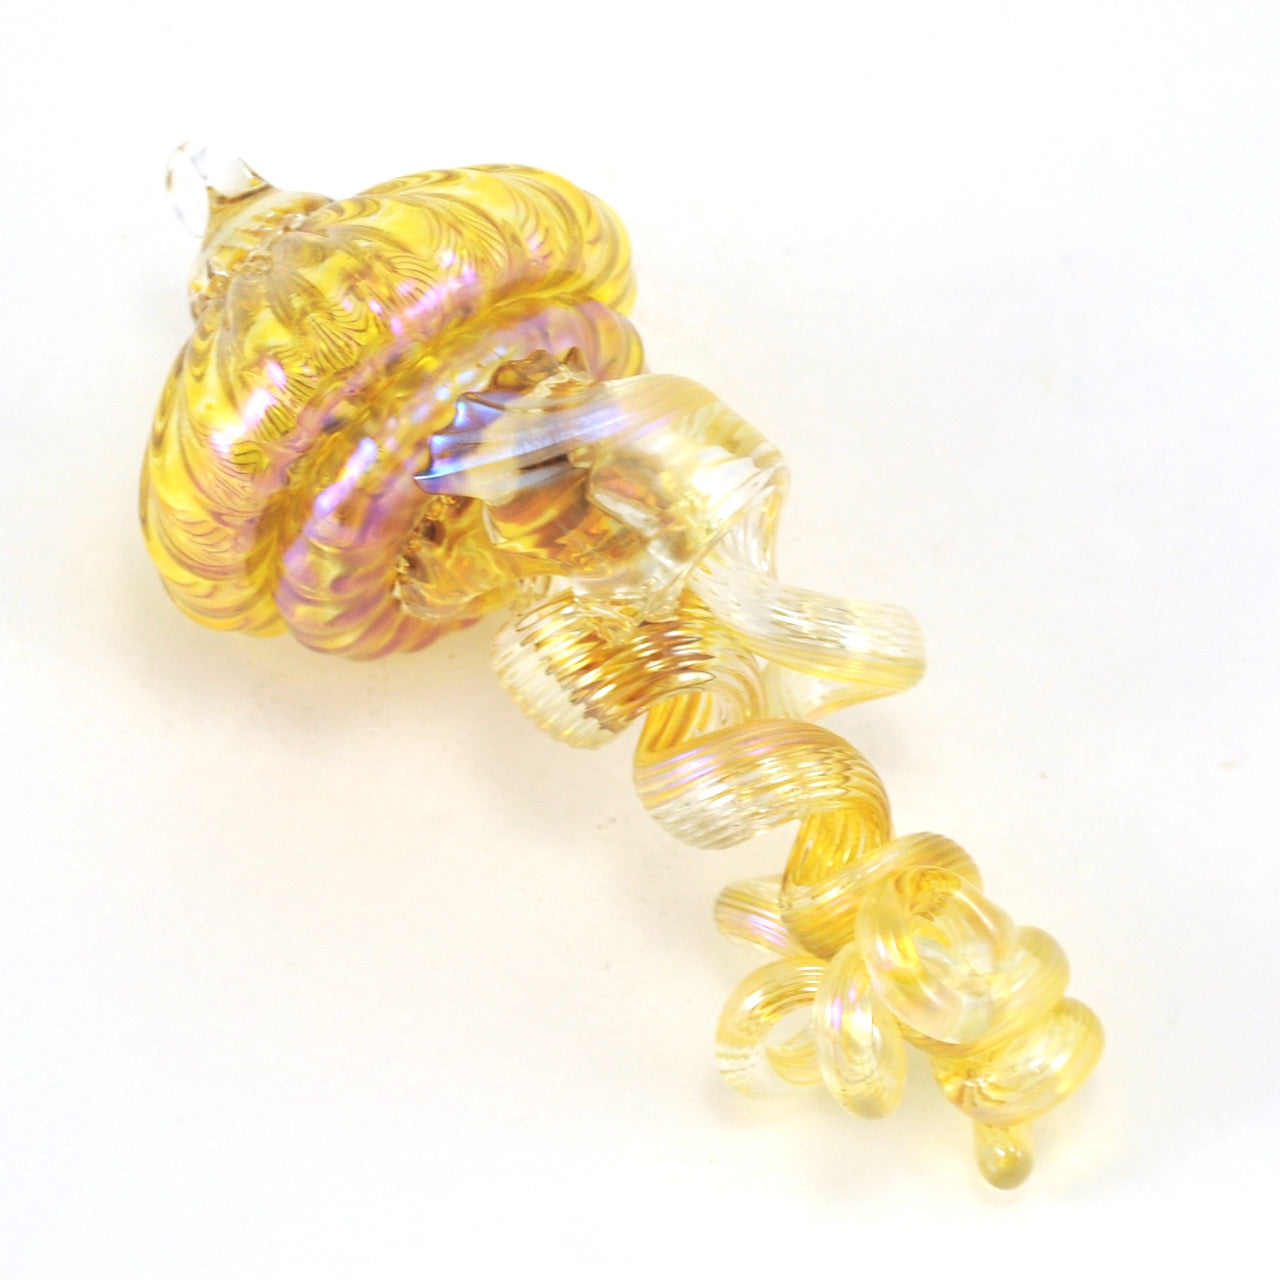 Glass Small Golden Hanging Jellyfish Ornament